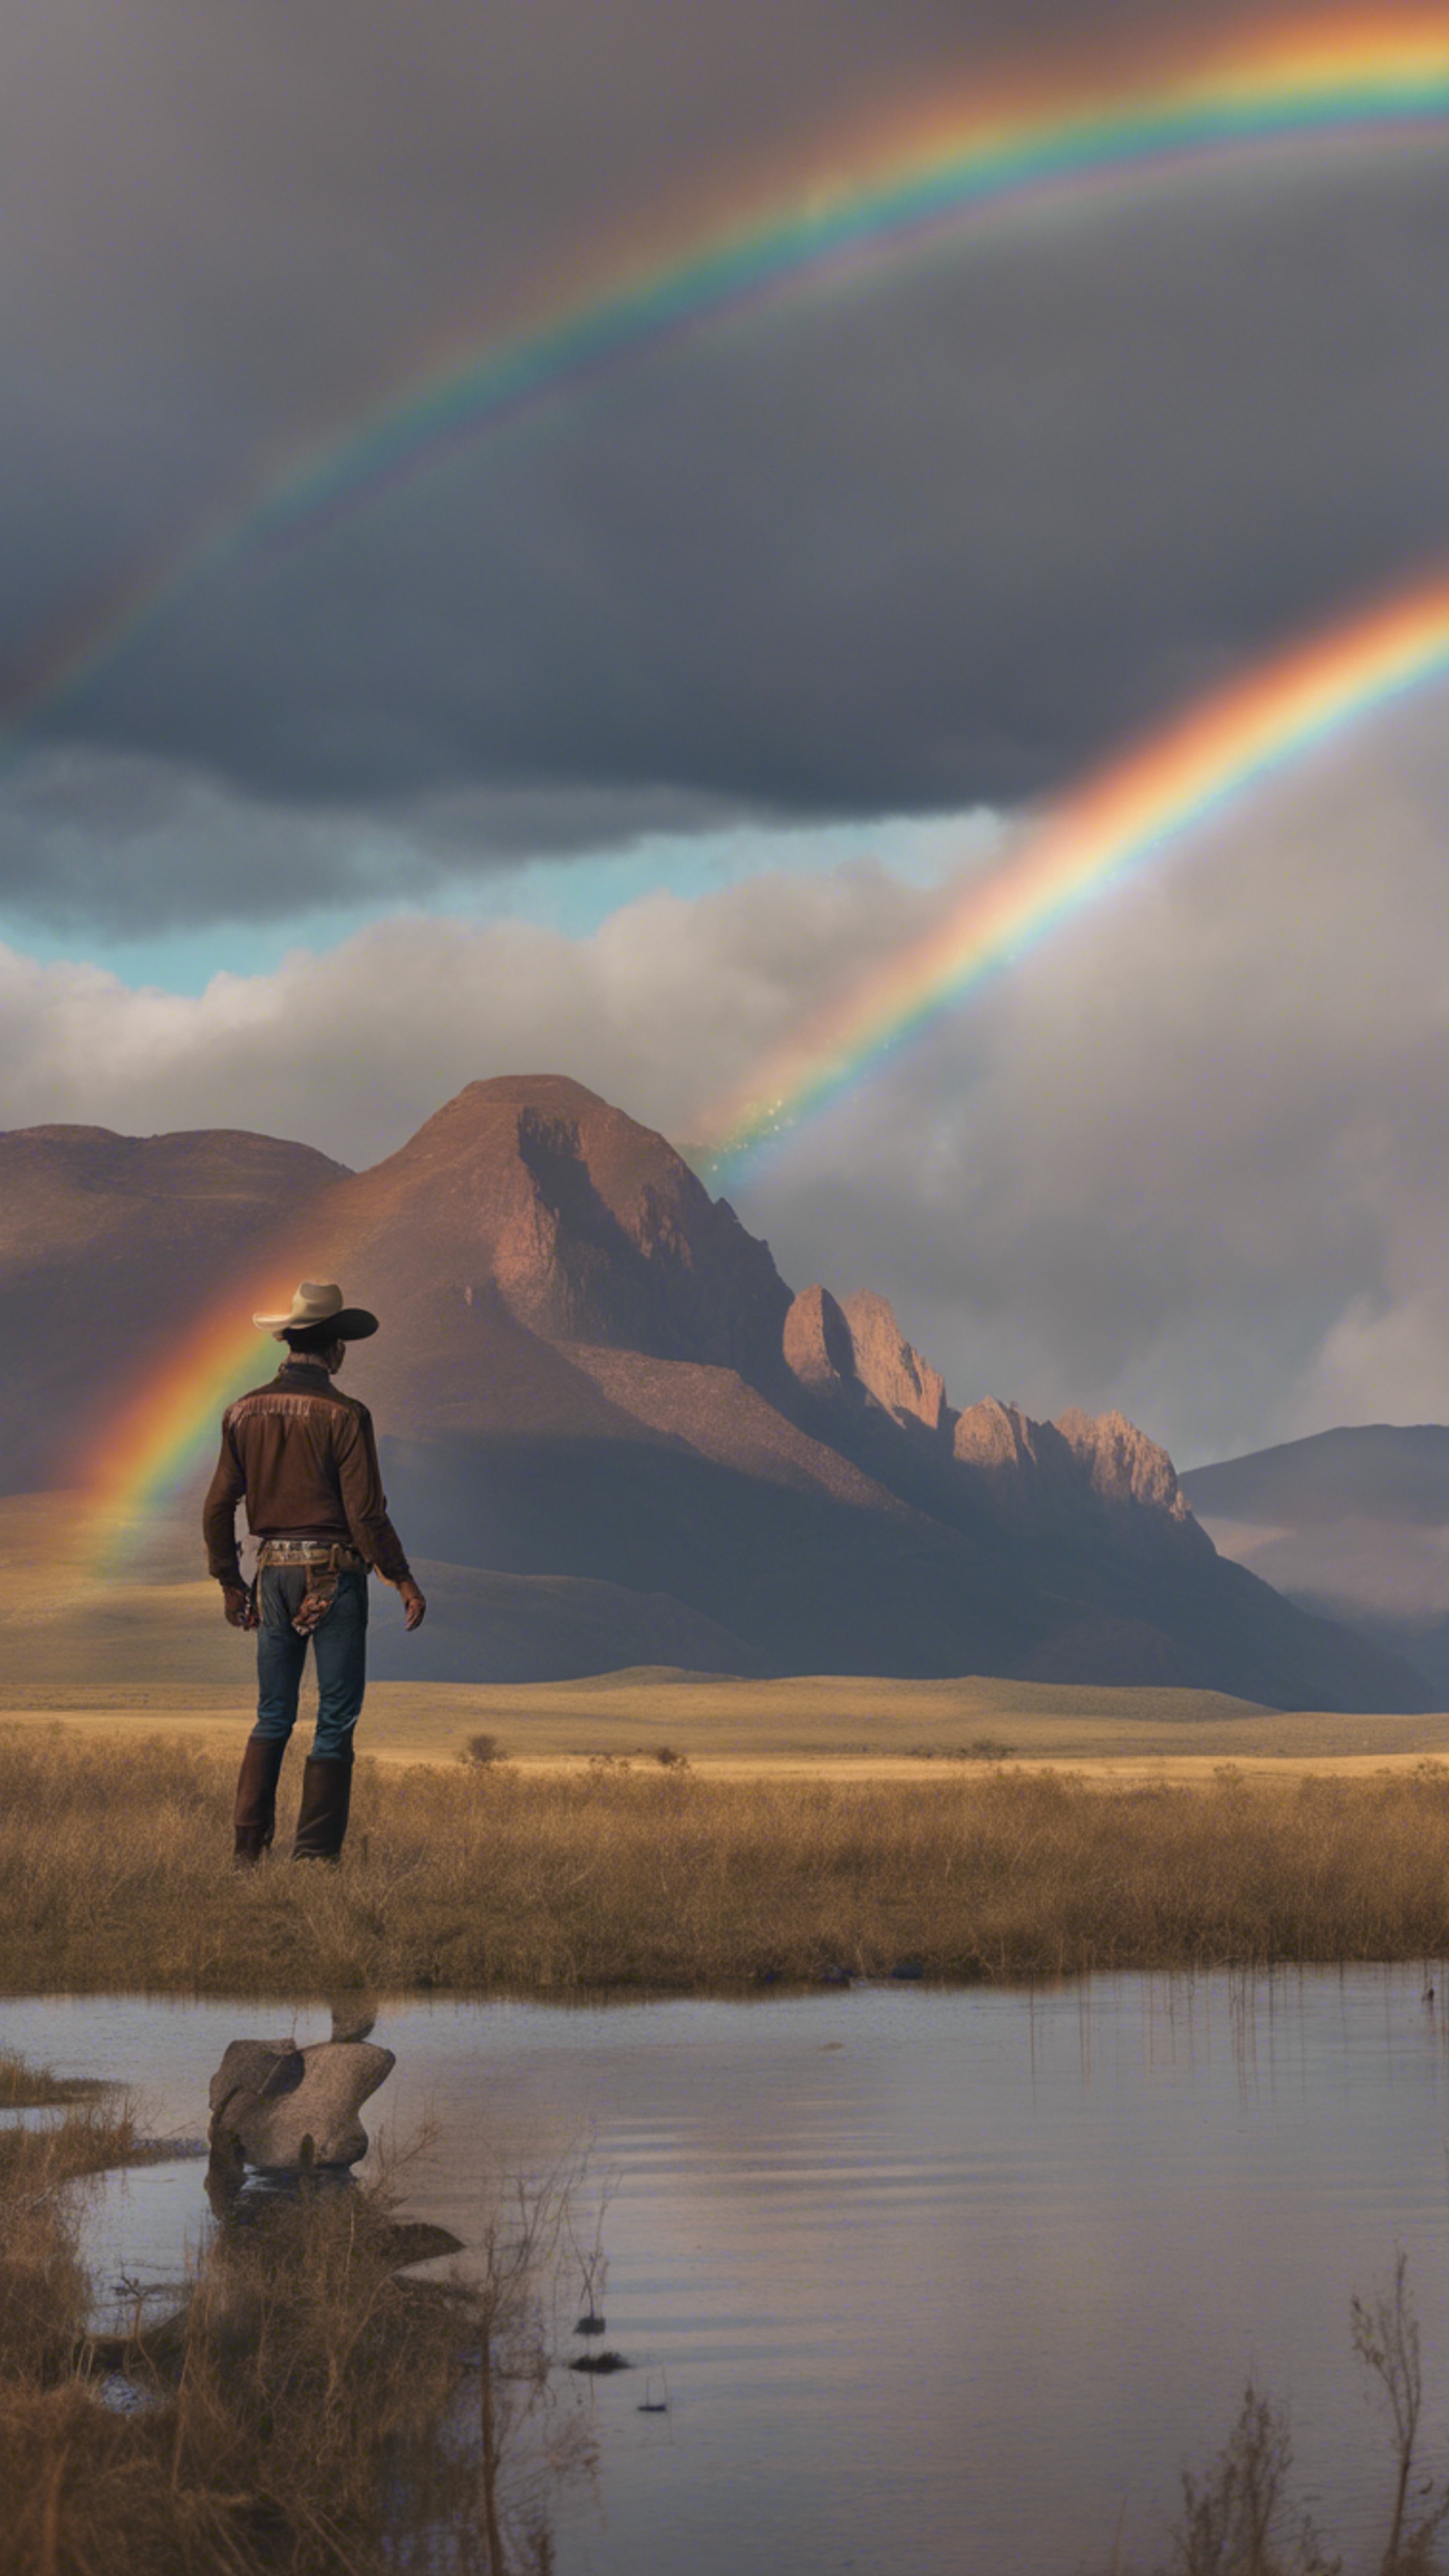 A cowboy sighting the end of a rainbow, with mountains standing tall in the backdrop. Wallpaper[4c187856e23946769cc3]